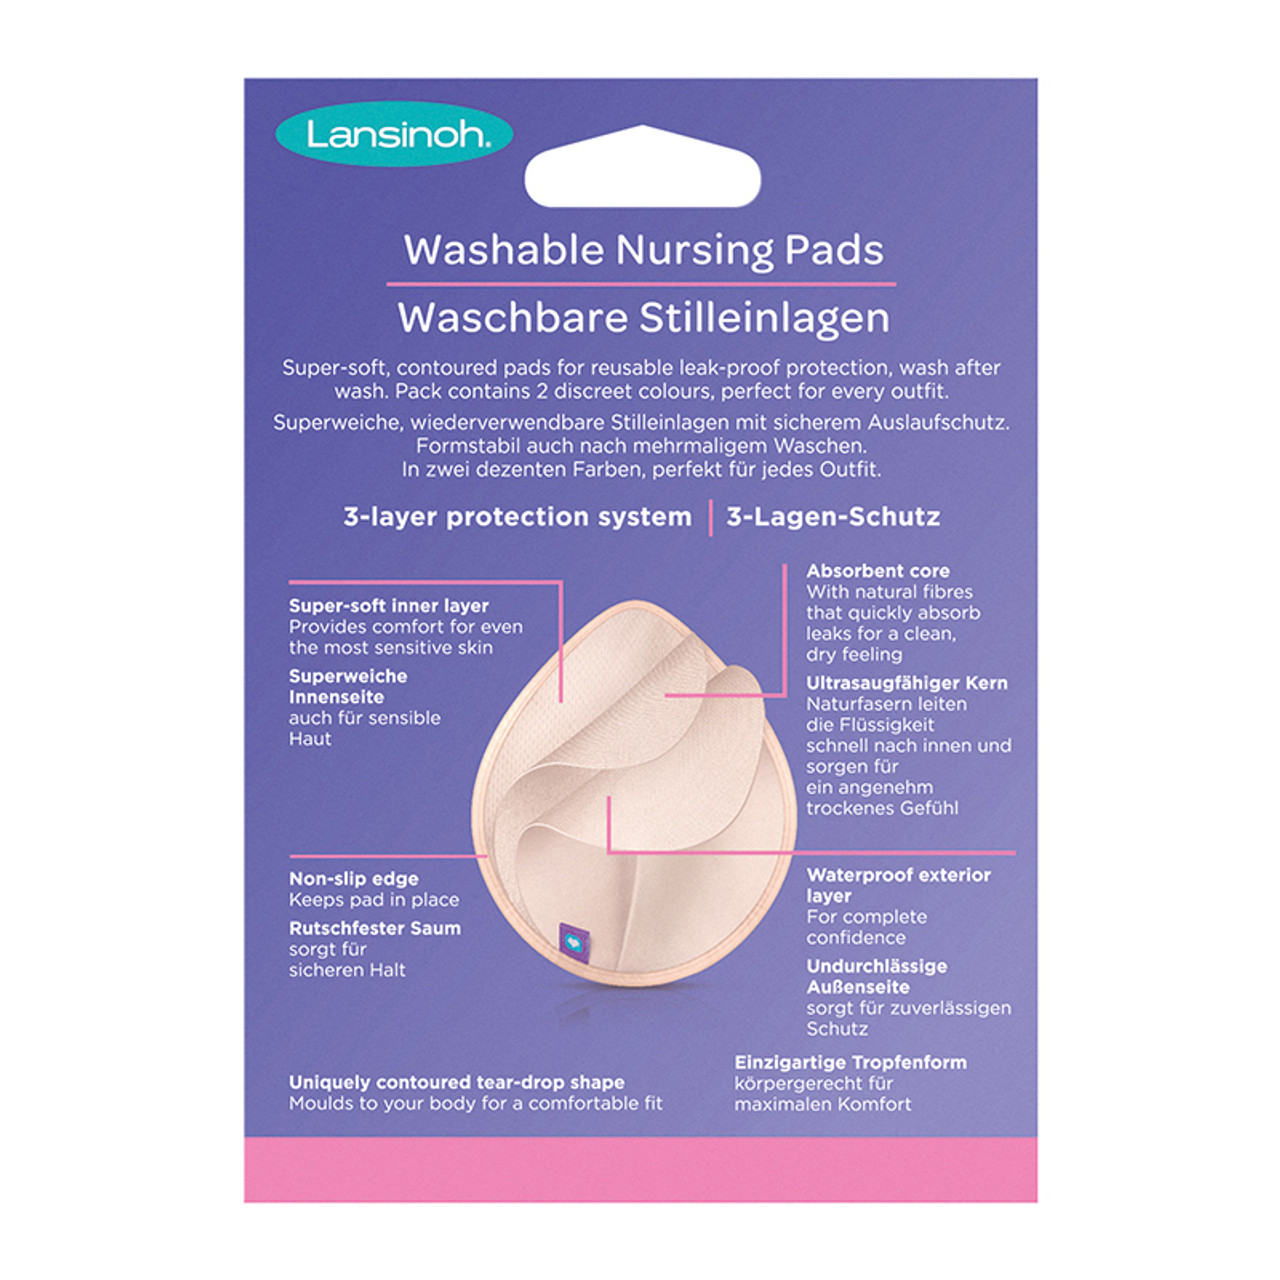 https://cdn11.bigcommerce.com/s-lwi4ic67pm/images/stencil/1280x1280/products/1201/5421/Distributor-of-Lansinoh-Washable-Nursing-Pads-Coloured-8Pk-LSH-HYG10-1__46650.1657204642.jpg?c=2